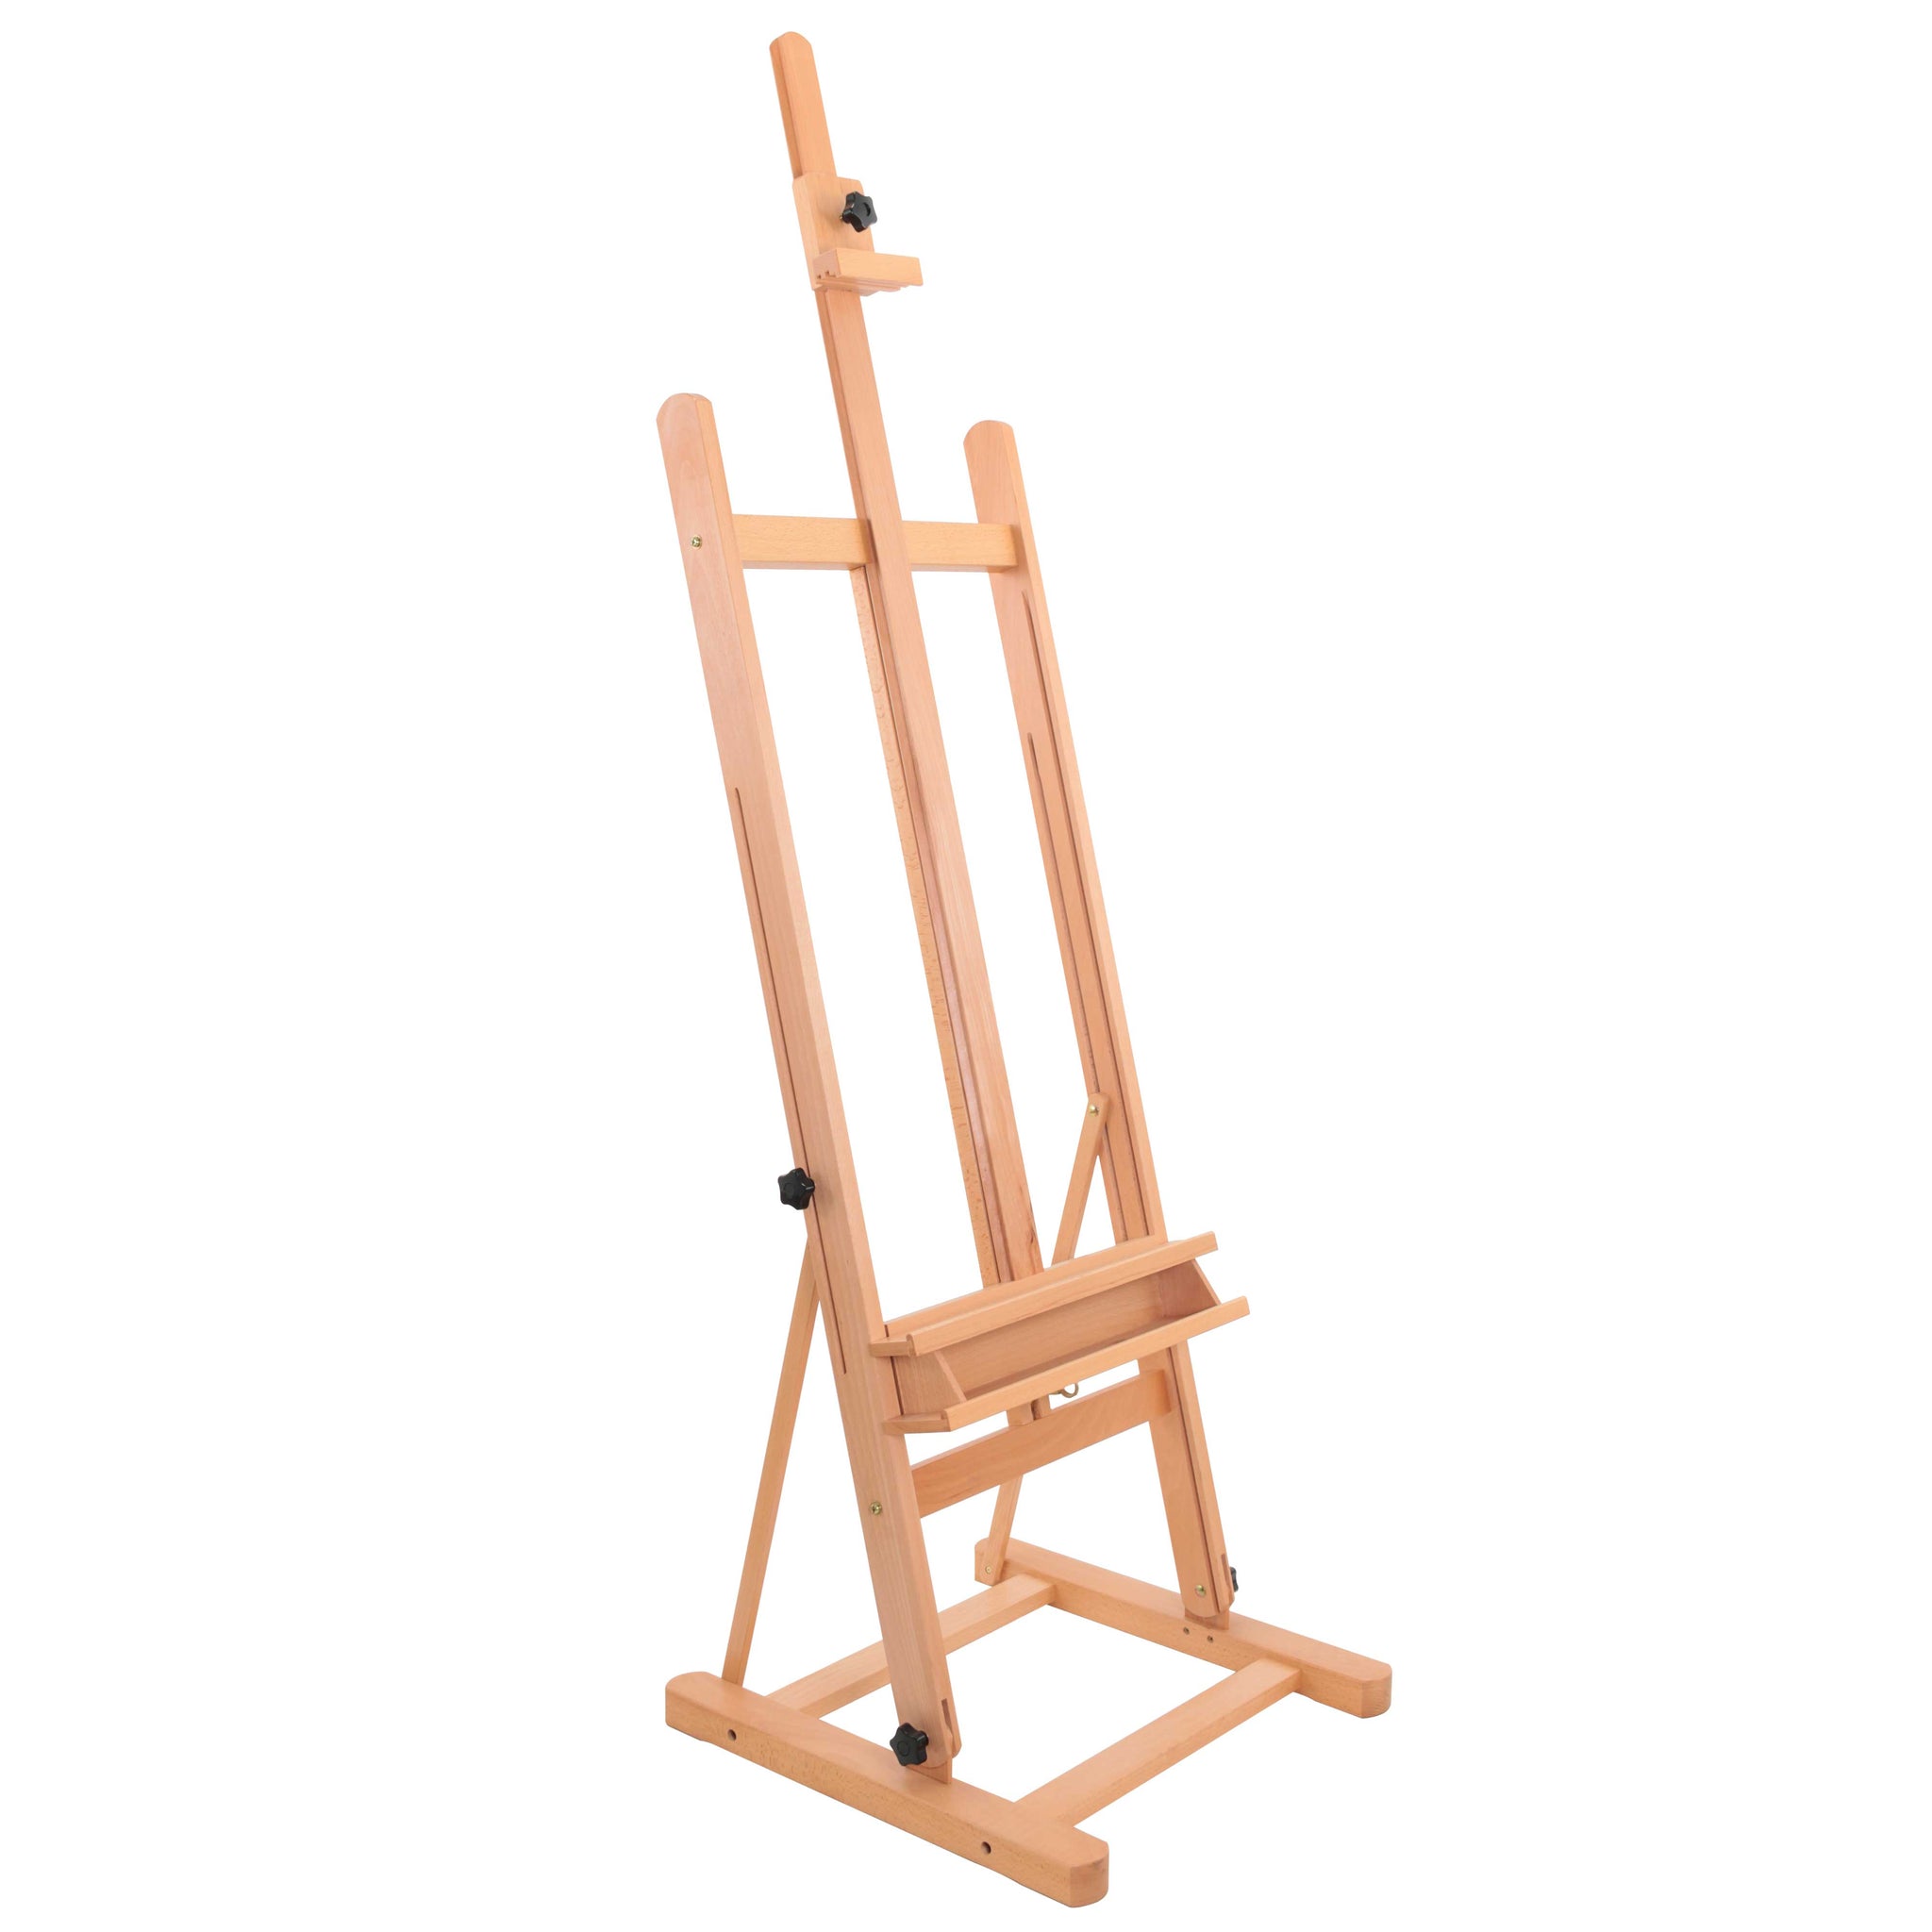 Medium Wooden H-Frame Studio Easel with Artist Storage Tray - Mast Adjustable to 96